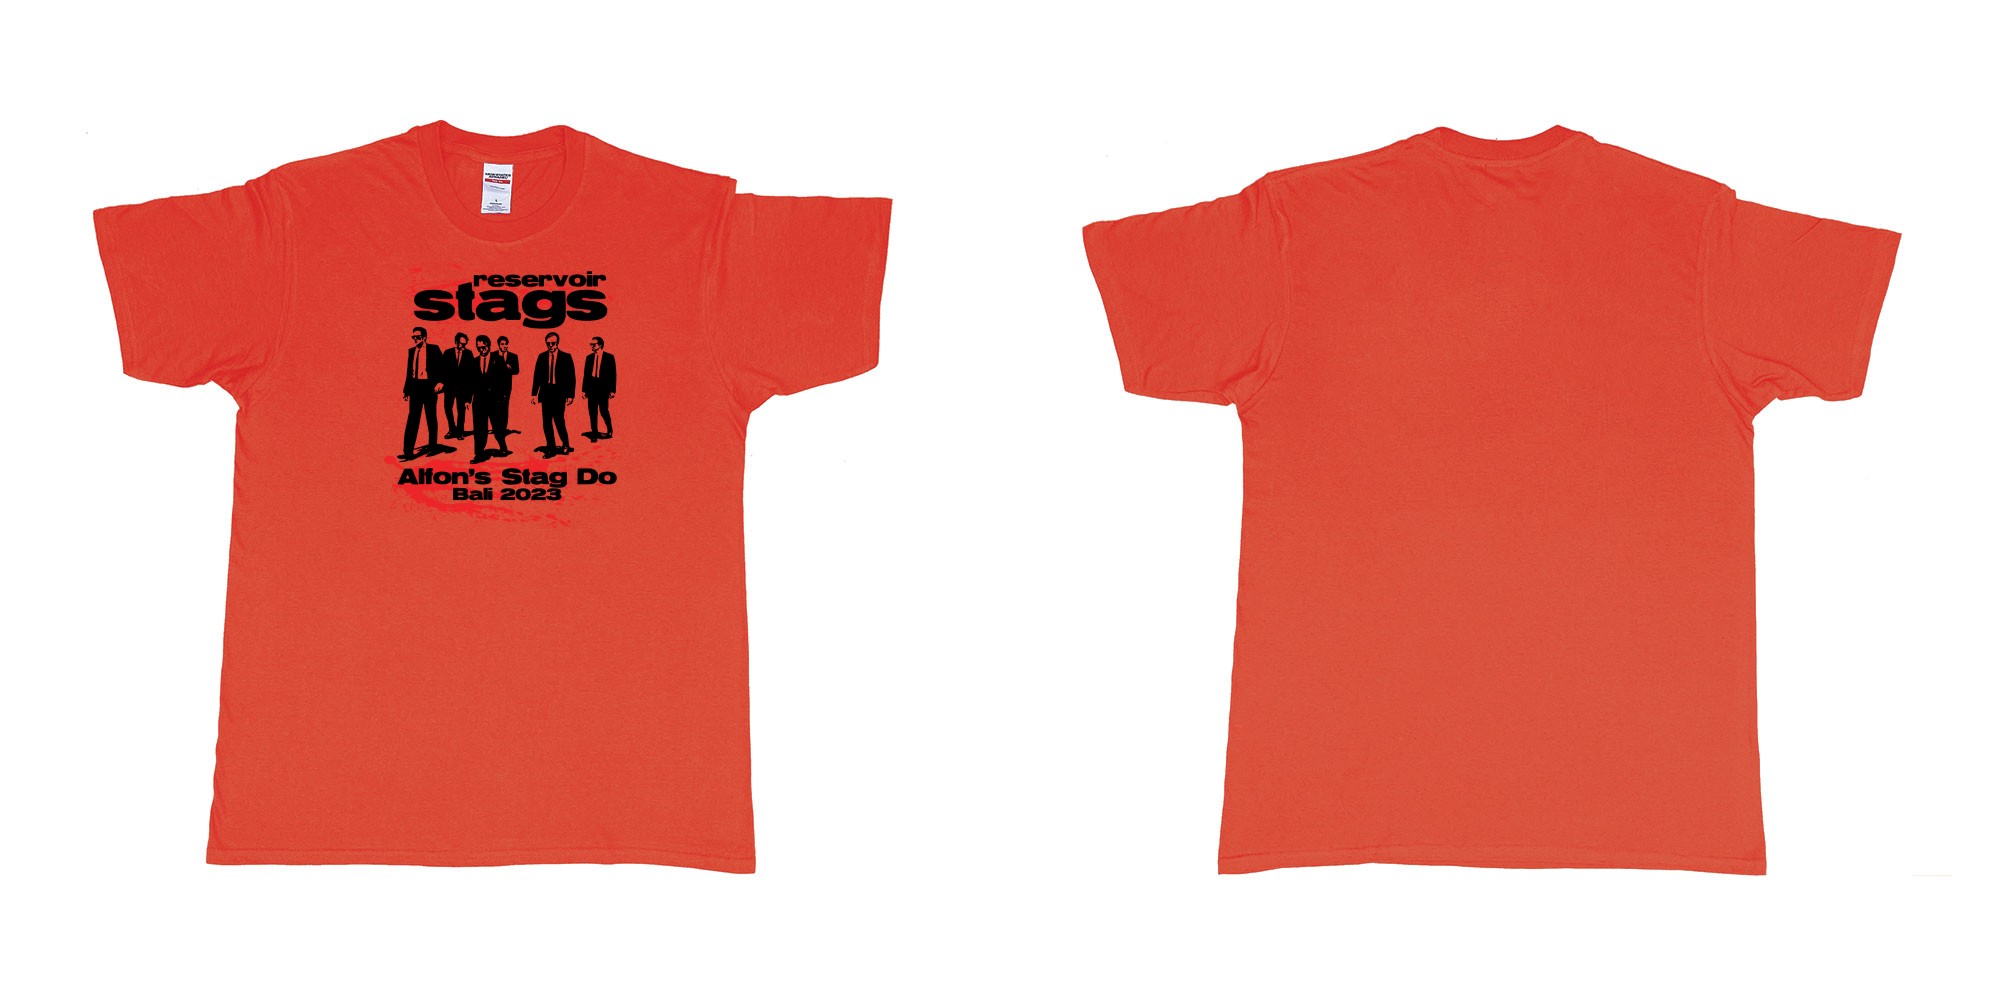 Custom tshirt design Reservoir Dogs Stag in fabric color red choice your own text made in Bali by The Pirate Way